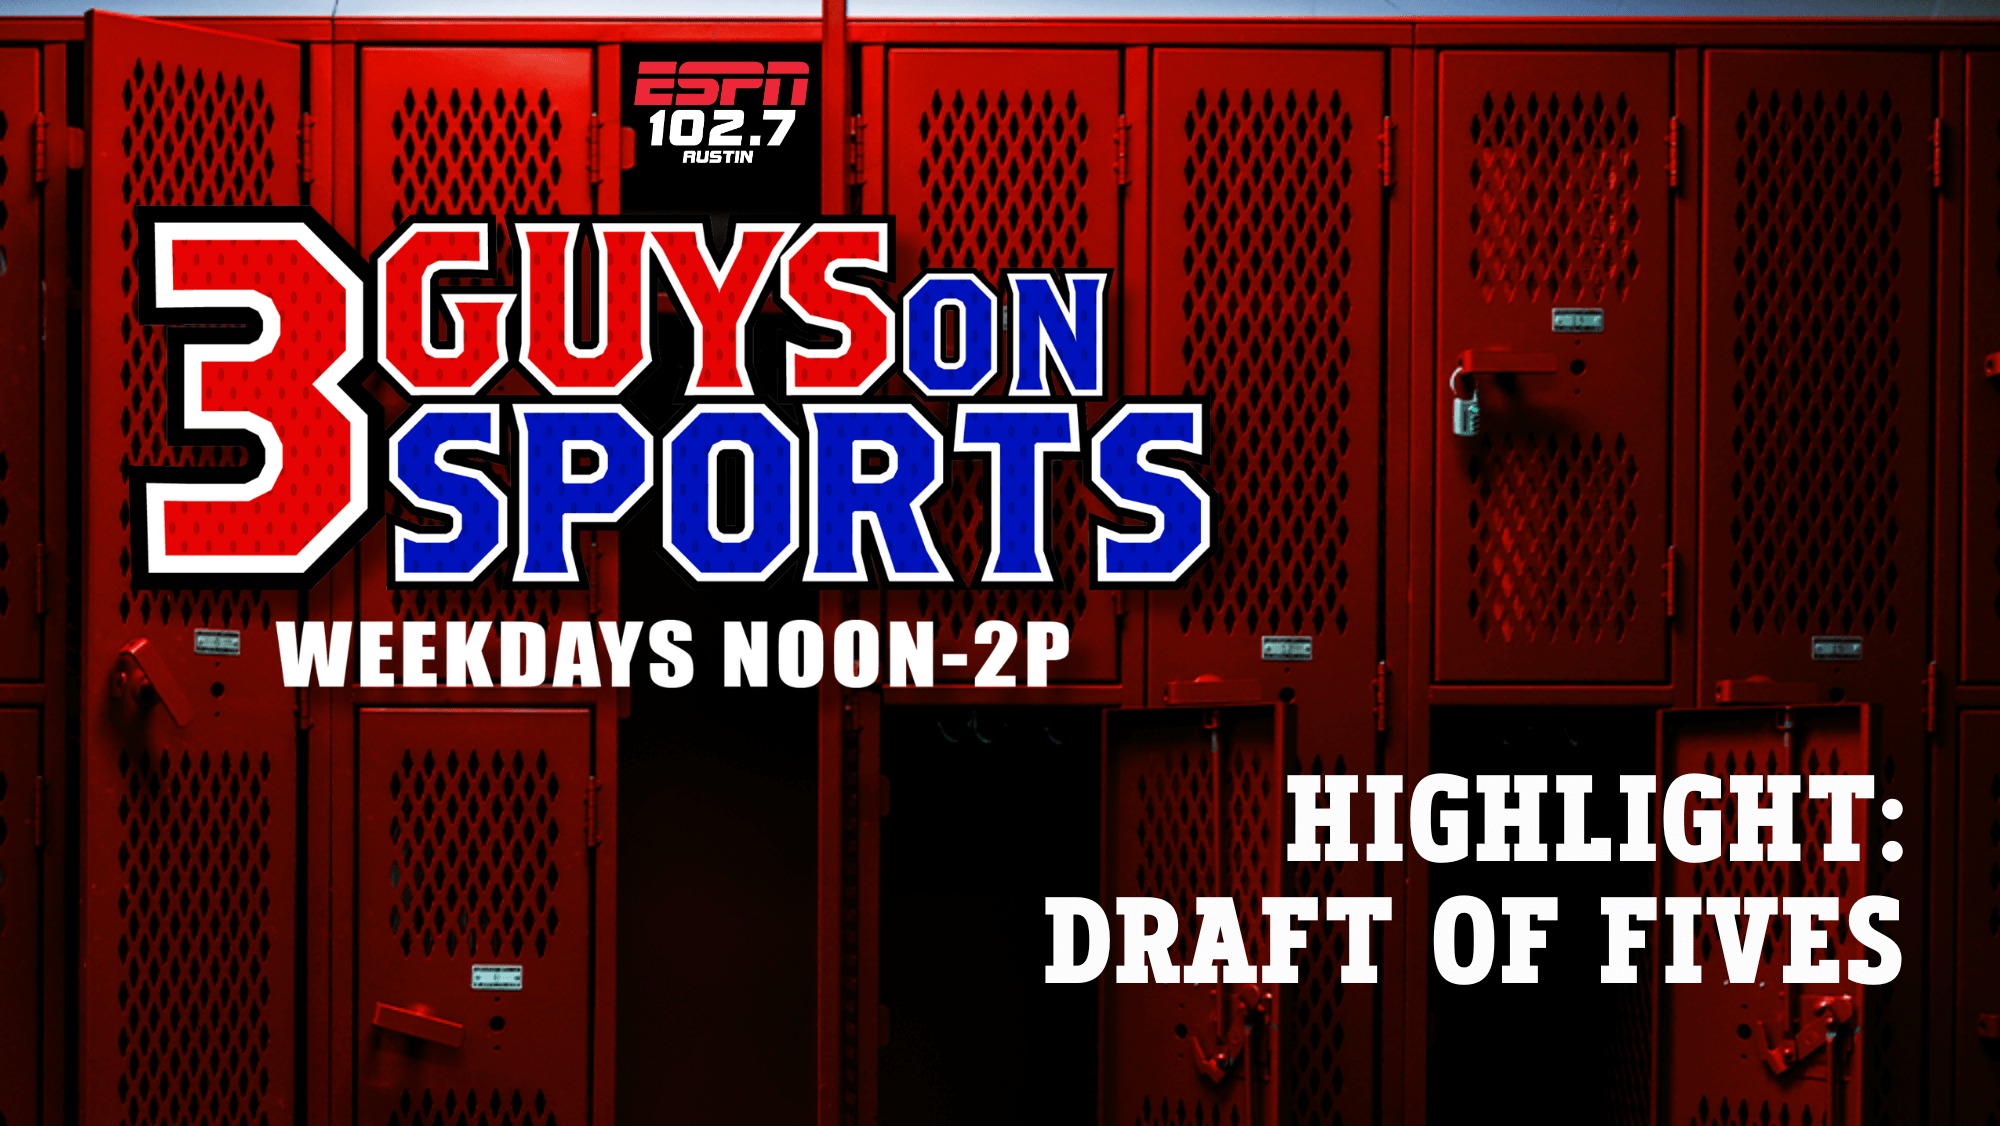 3 Guys on Sports Highlight: Draft of Fives